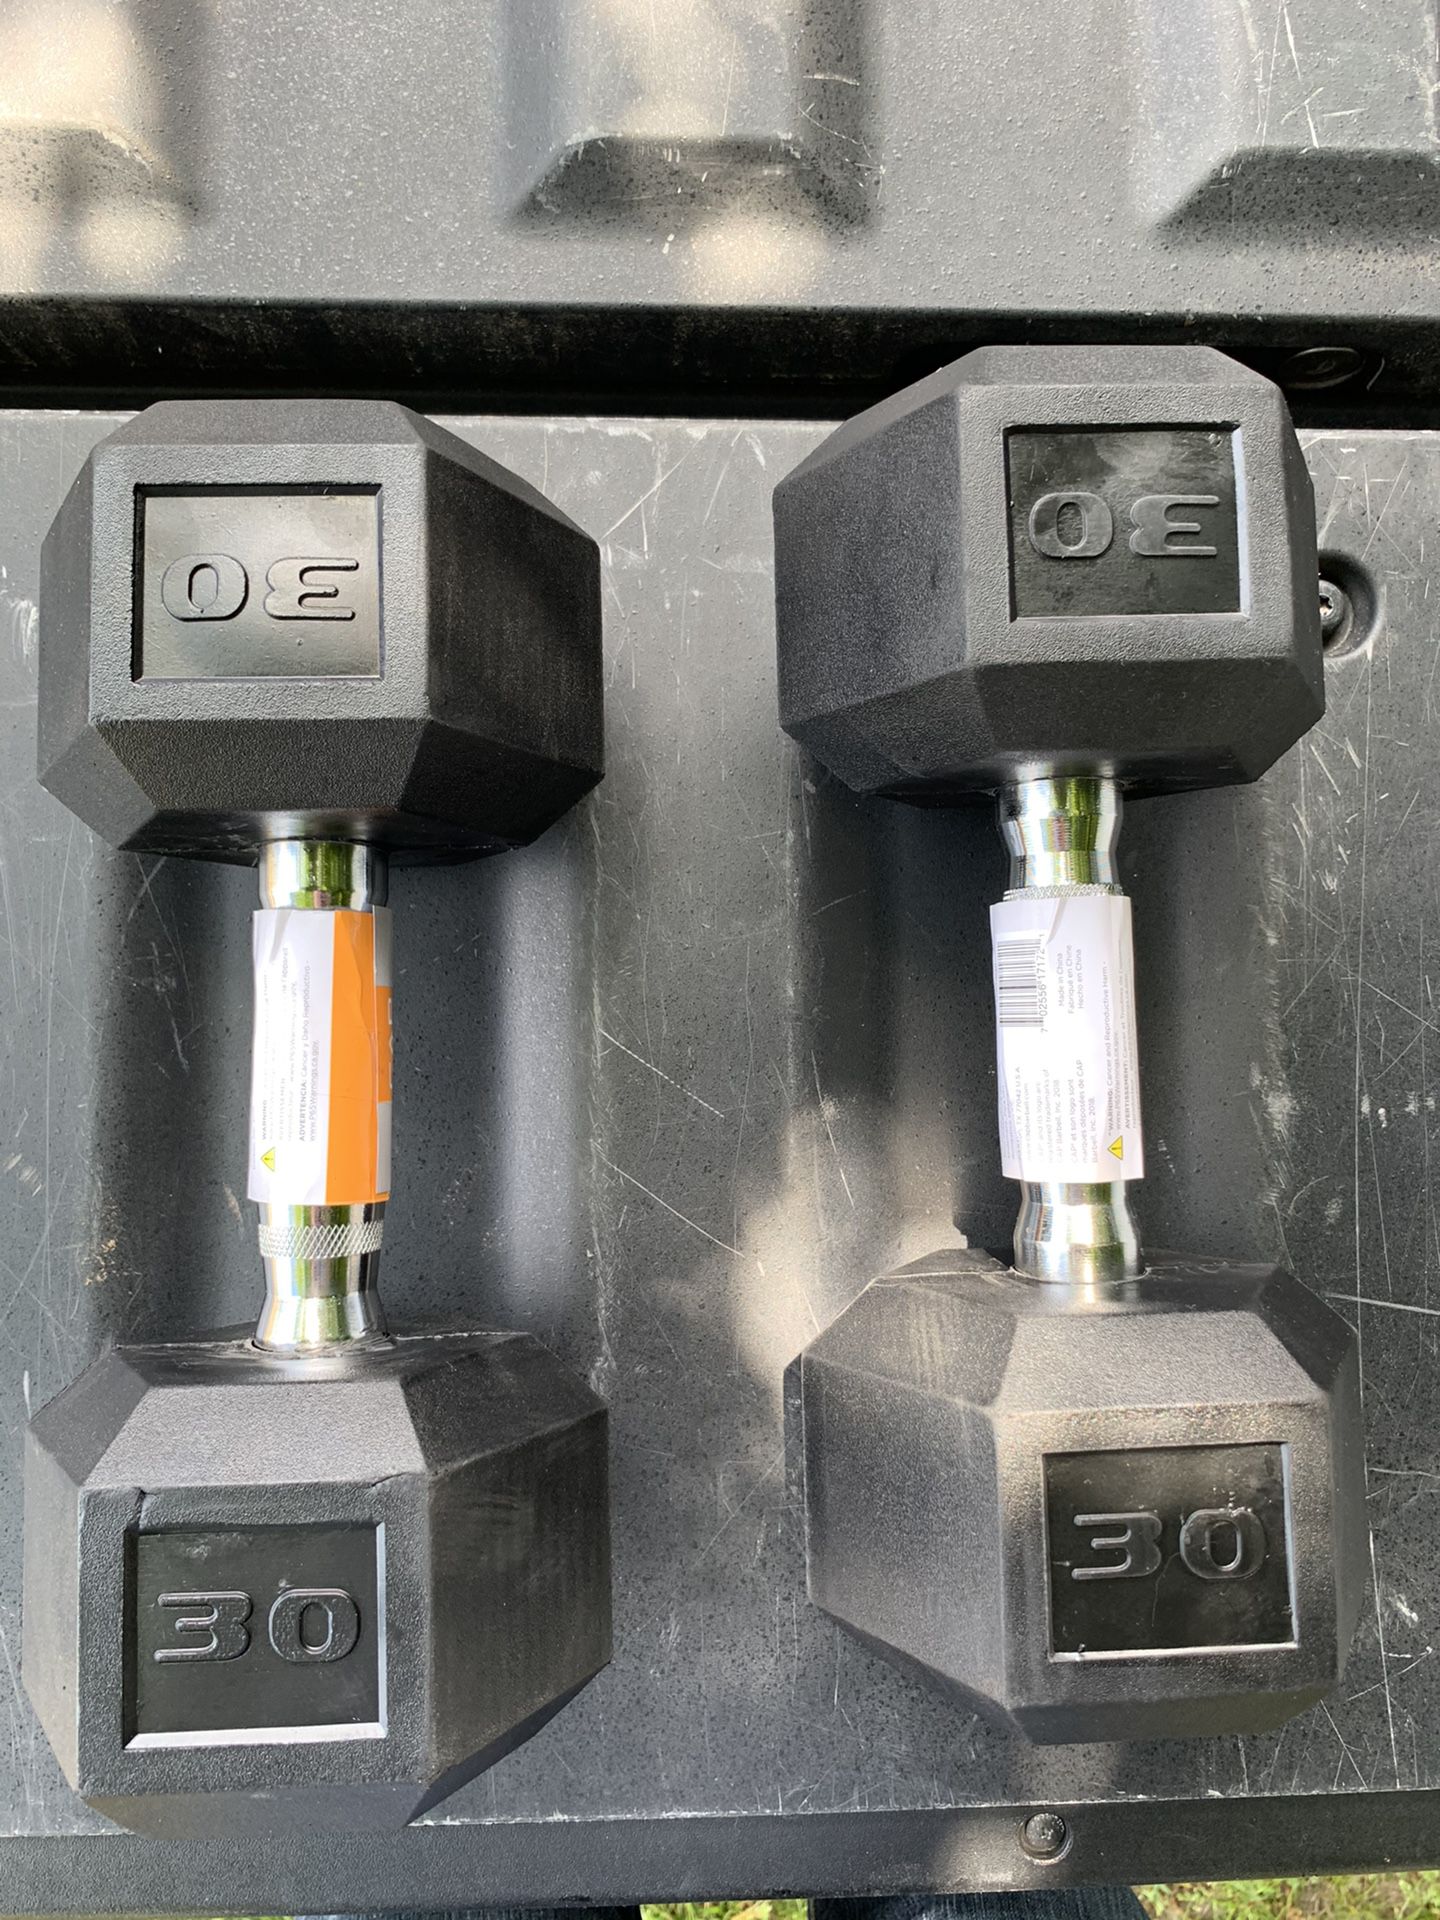 30 pound (lb) dumbbells pair. Hex rubber coated. 60 lbs total. BRAND NEW